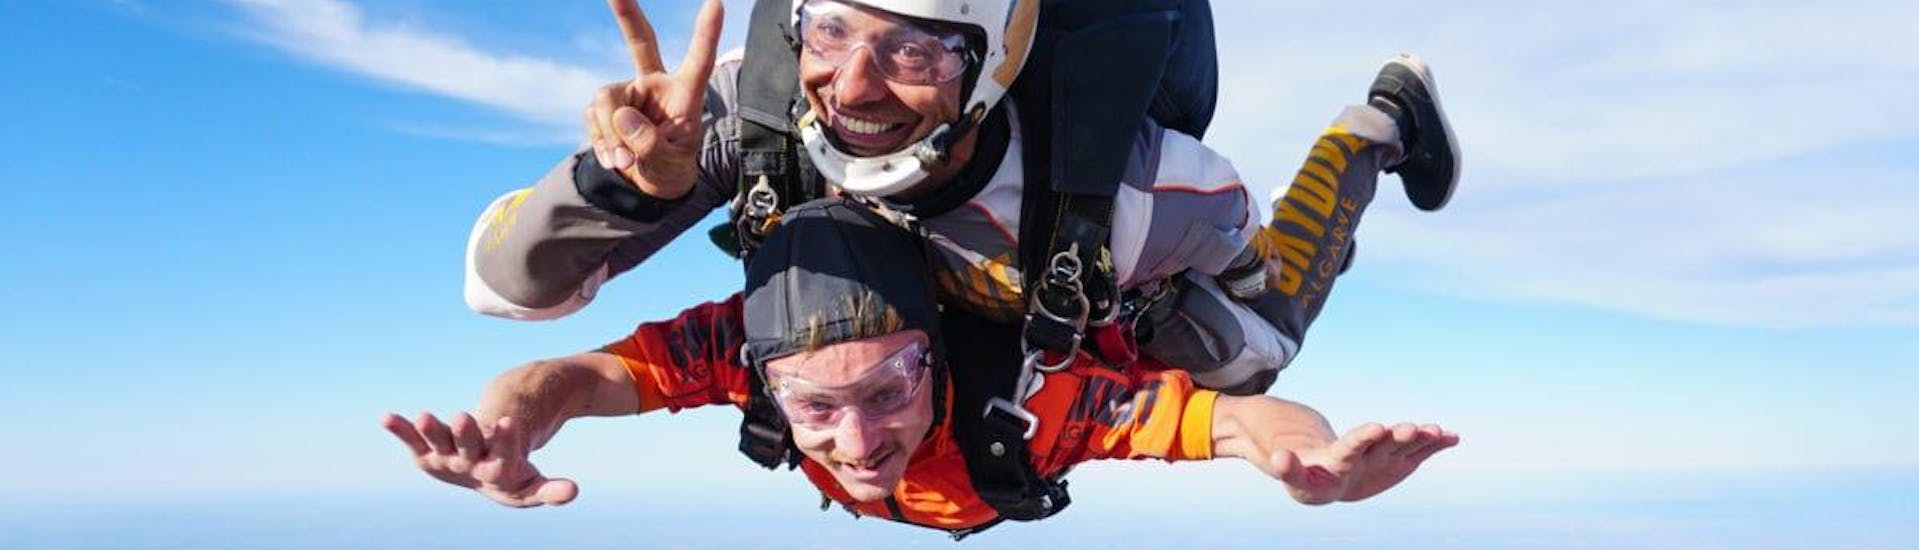 The instructor posing for the camera while falling during the Tandem Skydive from 10,000 ft - Algarve with Skydive Algarve.